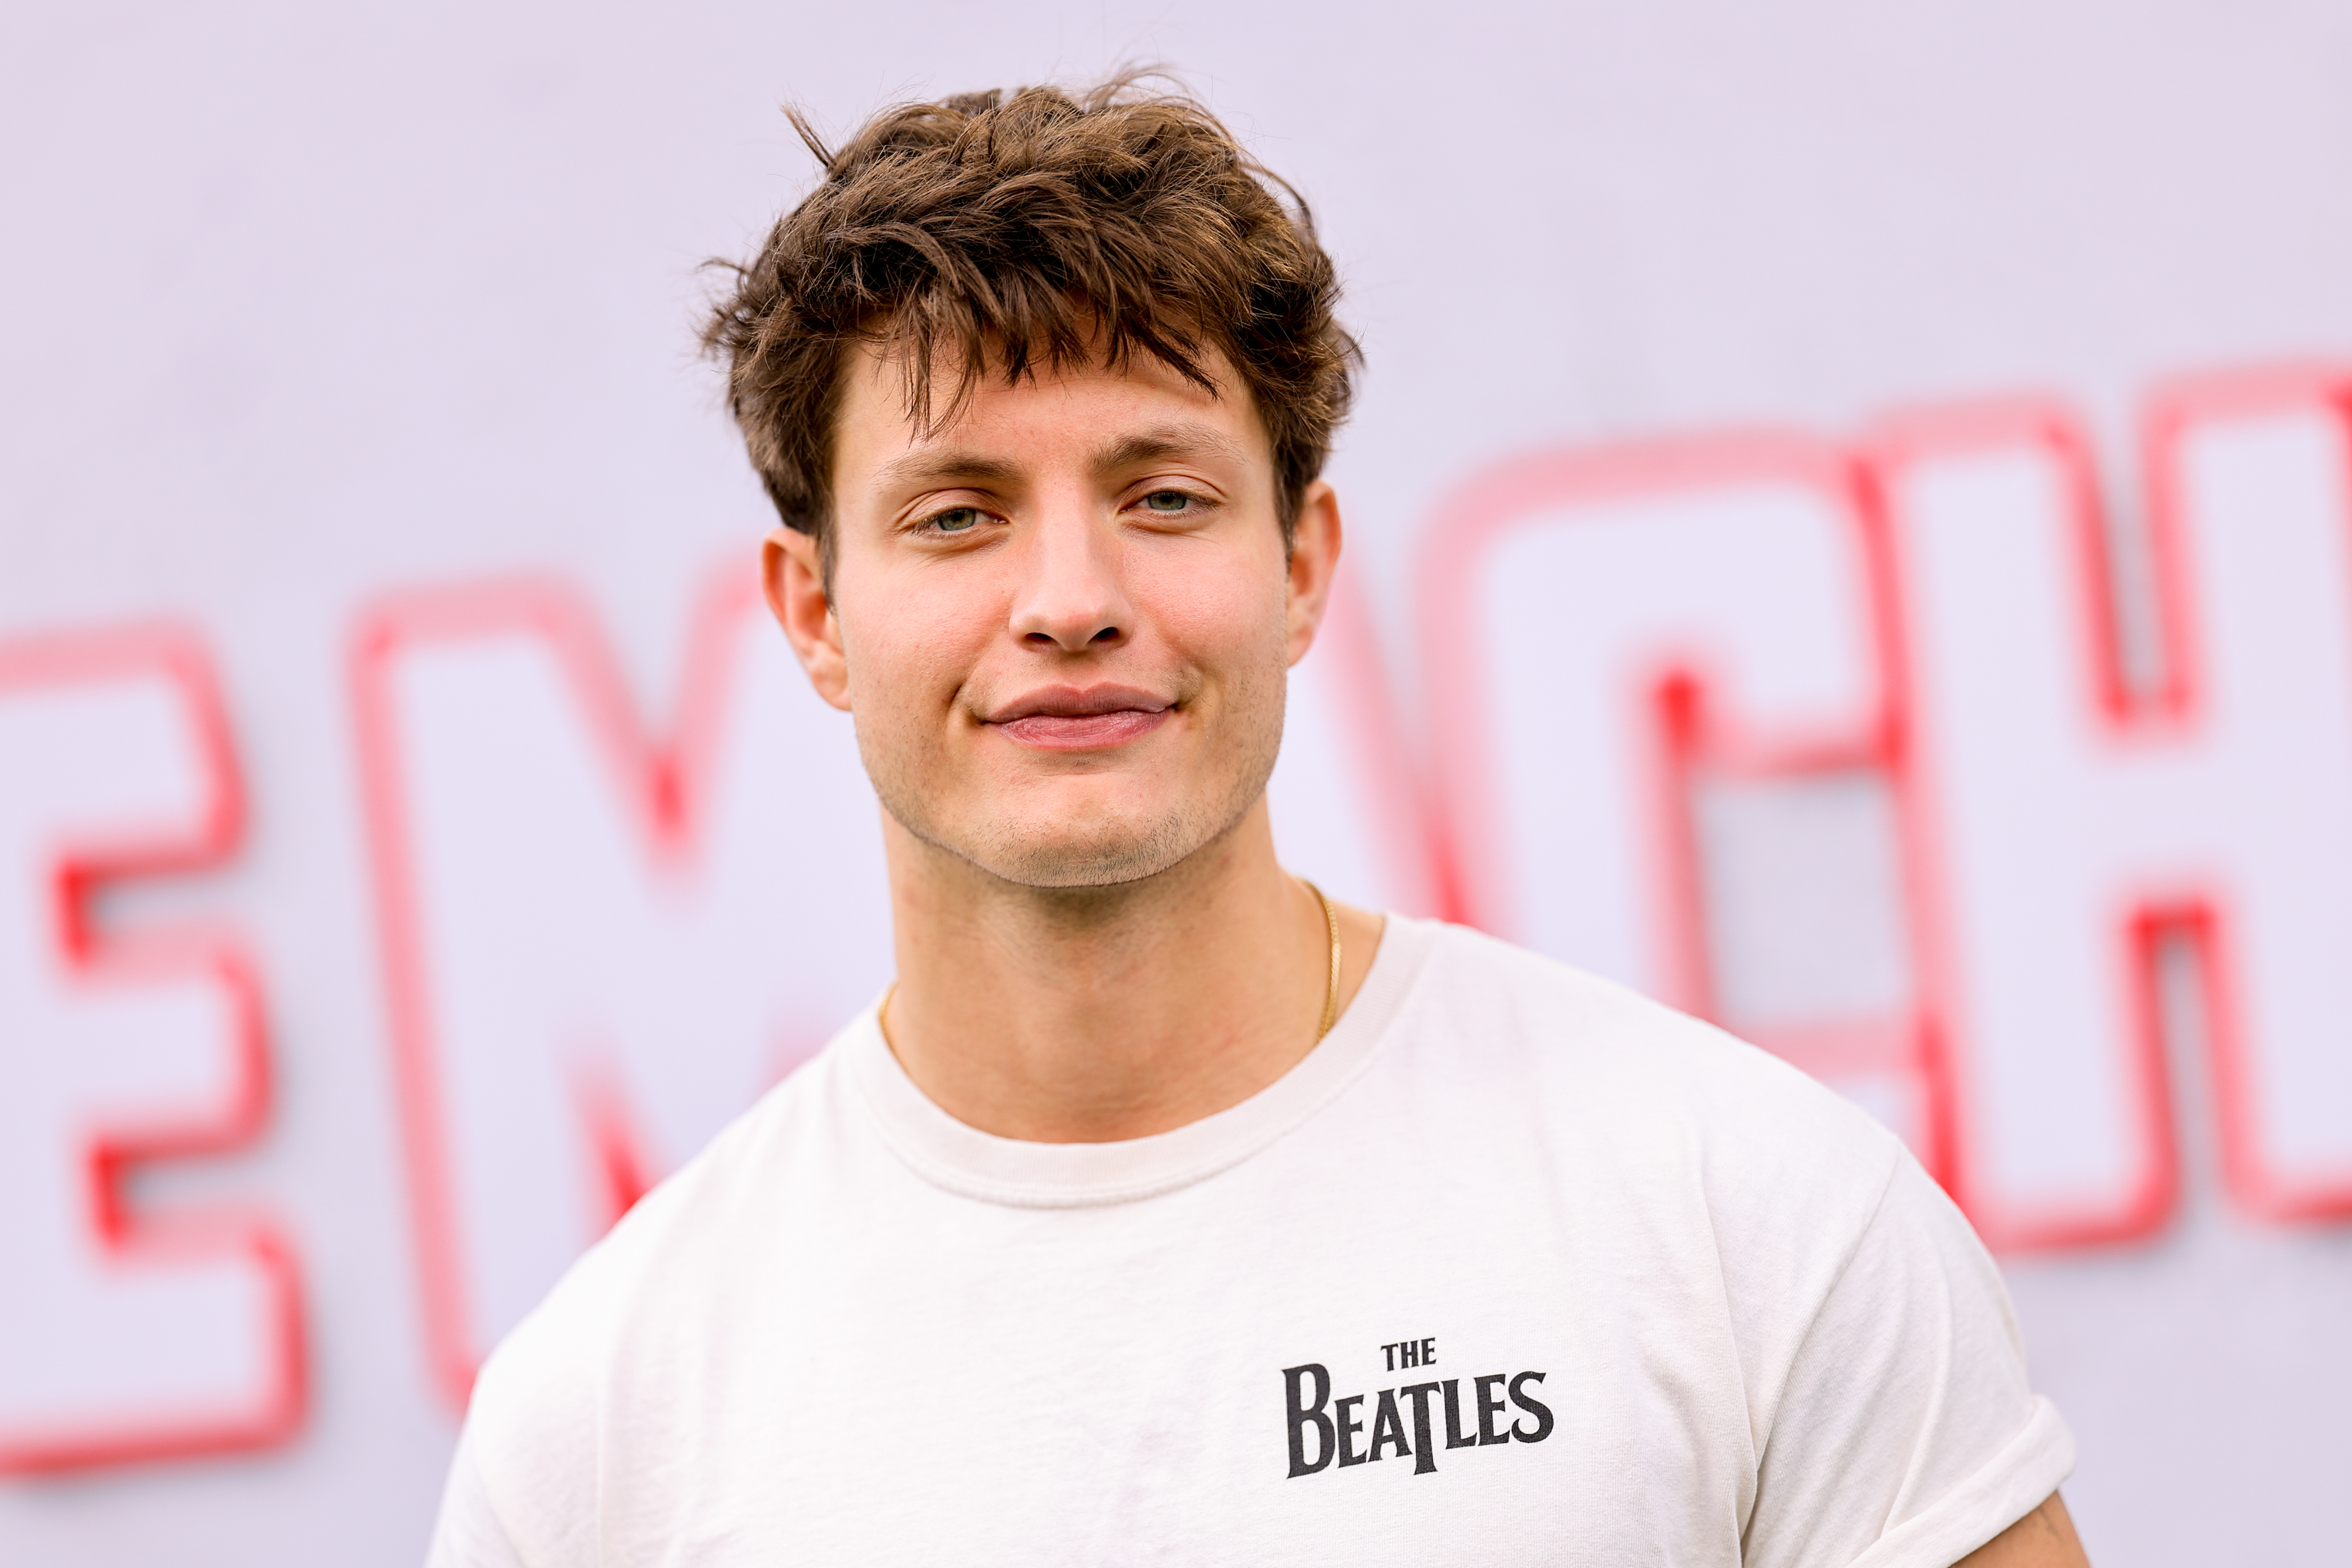 Matt Rife smiling with short hair, wearing a T-shirt with &quot;The Beatles&quot; text, in front of a blurred backdrop